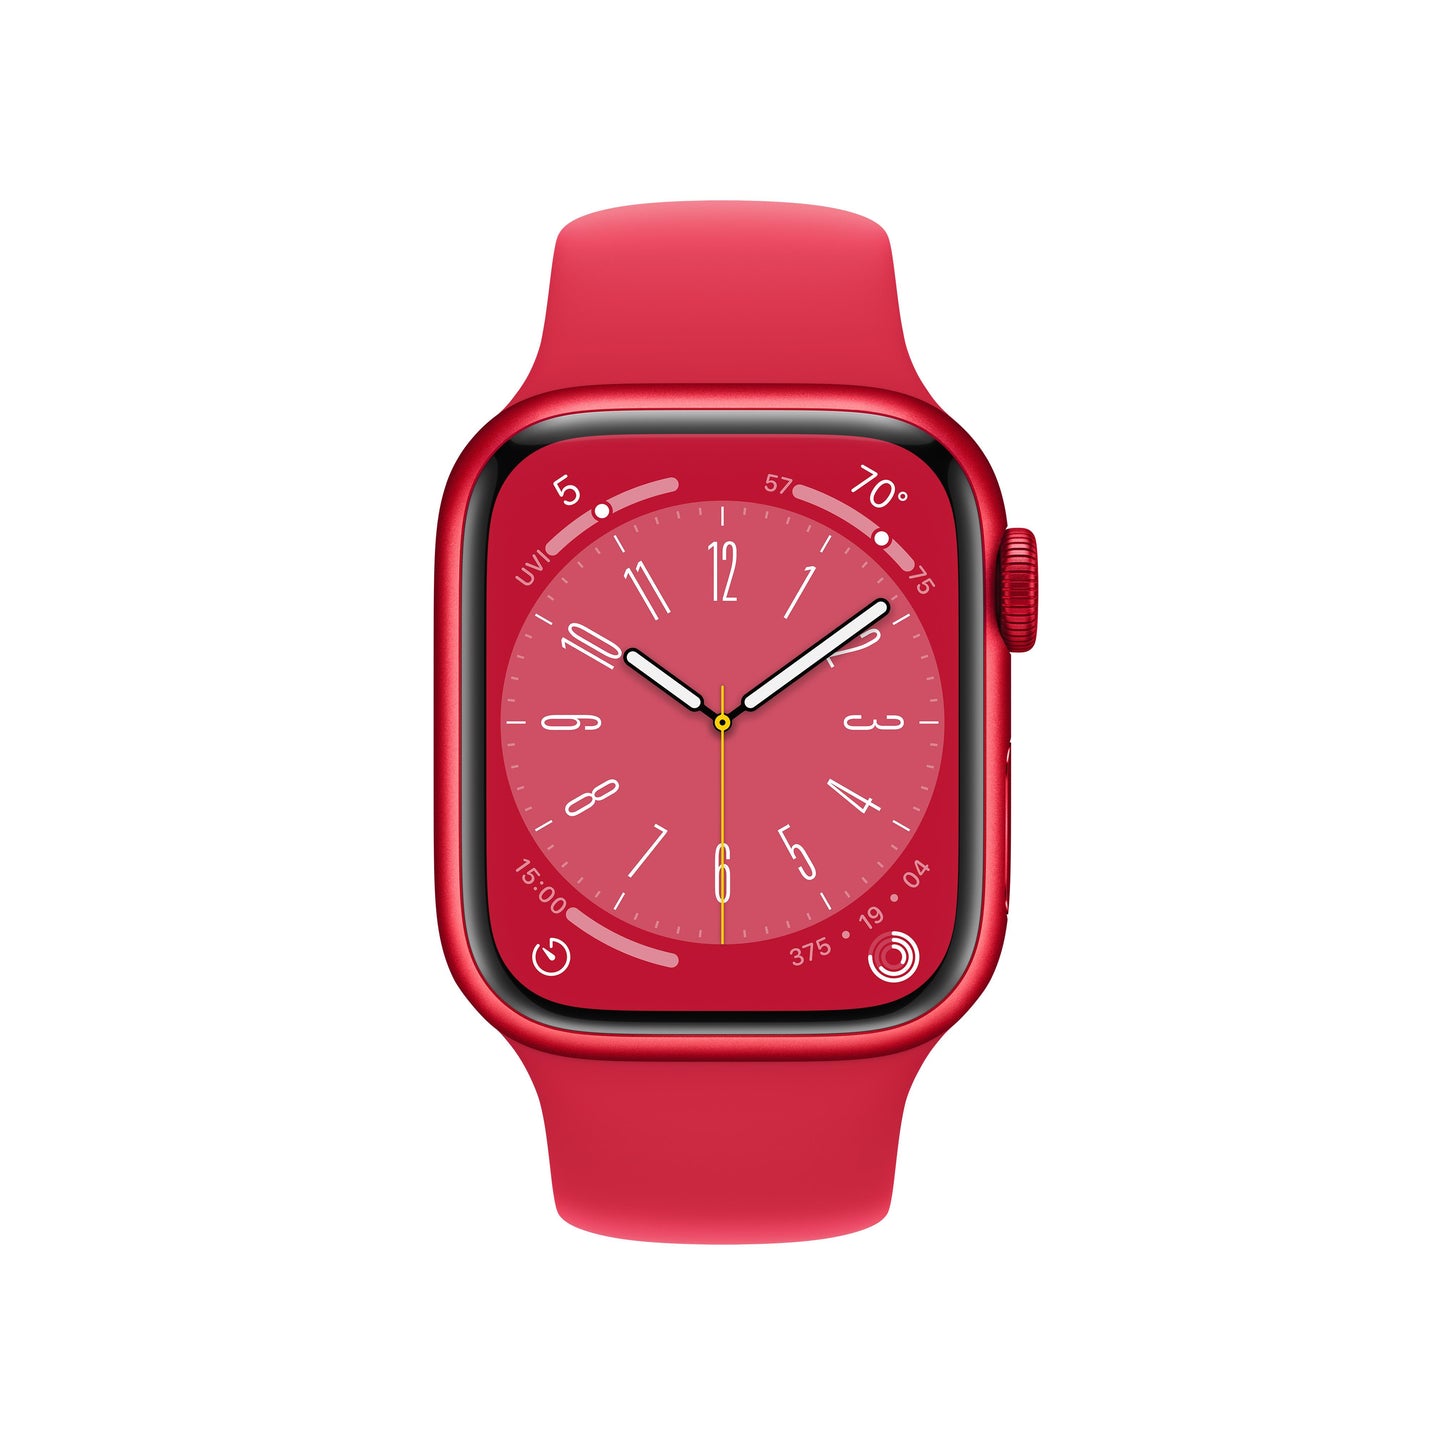 Apple Watch Series 8 GPS + Cellular 41mm (PRODUCT)RED Aluminum Case with (PRODUCT)RED Sport Band - Regular